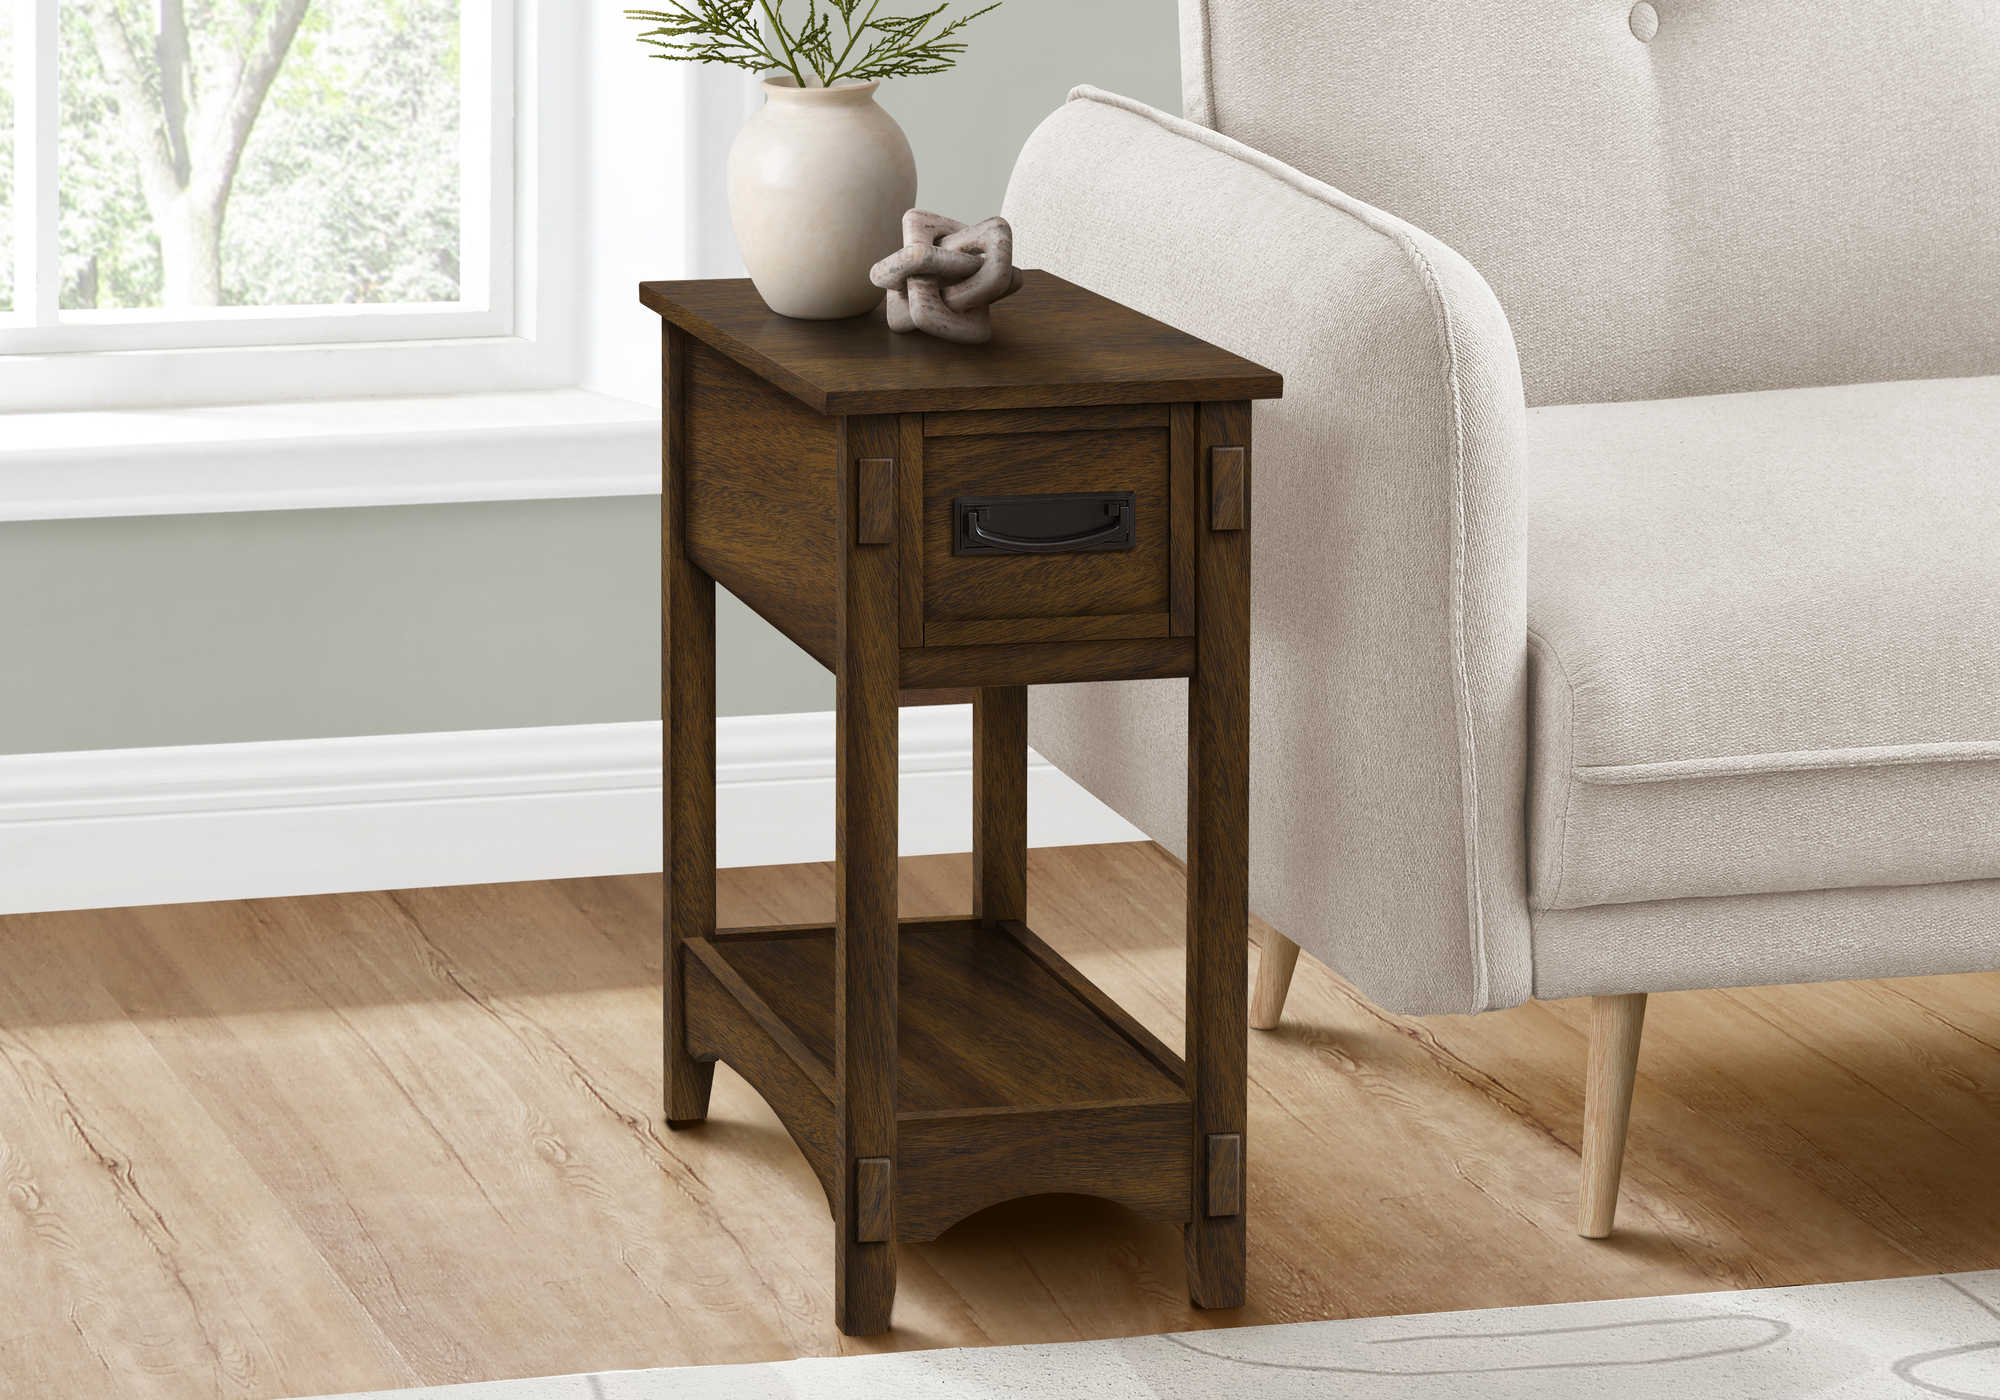 ACCENT TABLE - 24"H / BROWN WALNUT VENEER END TABLE